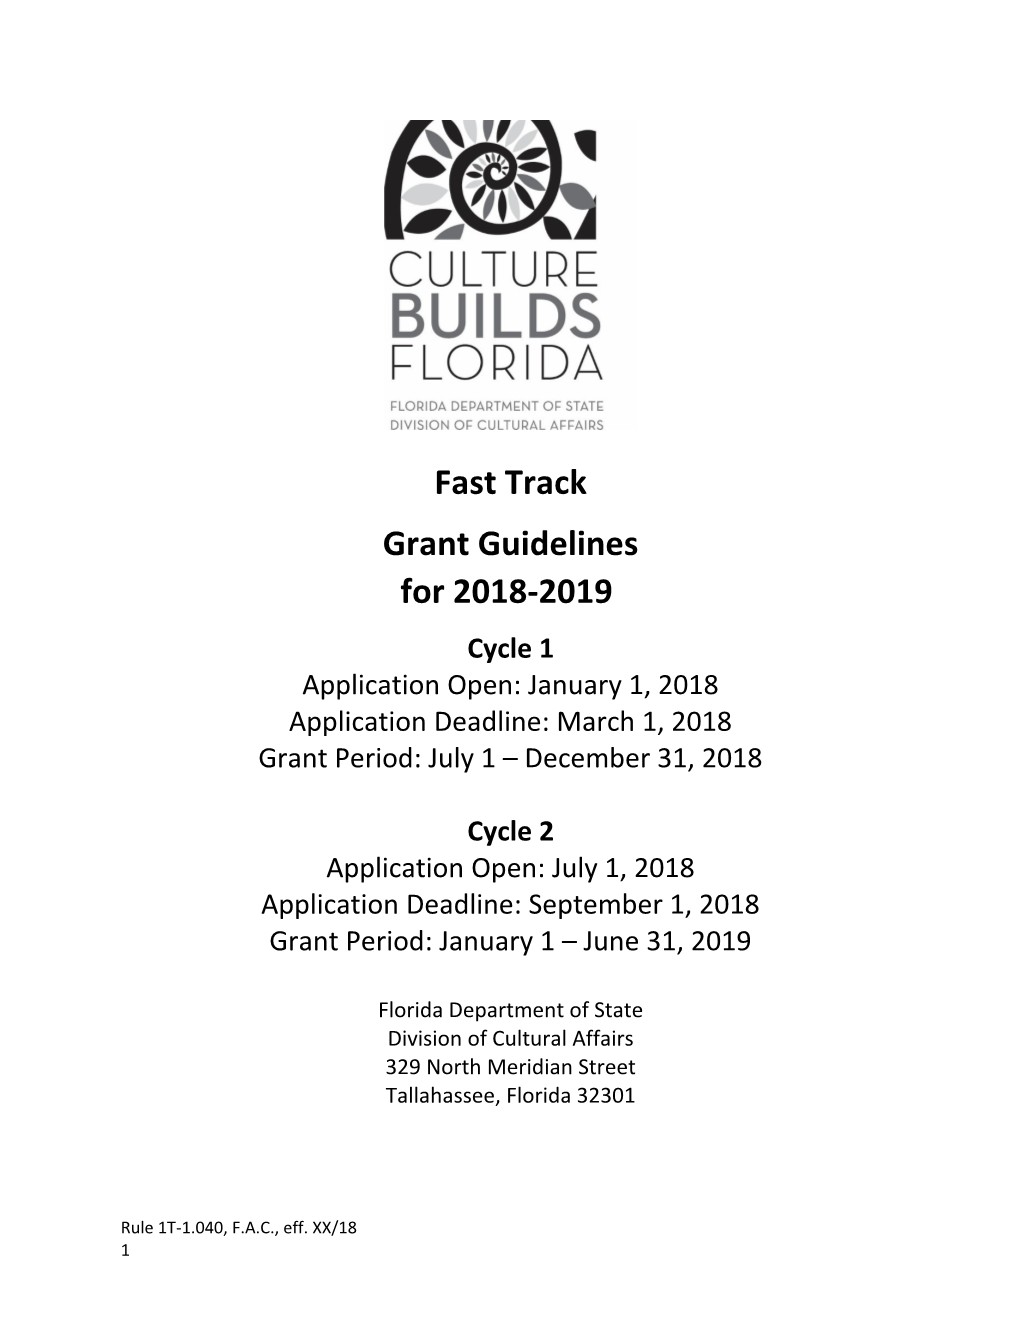 Grant Guidelines for 2018-2019